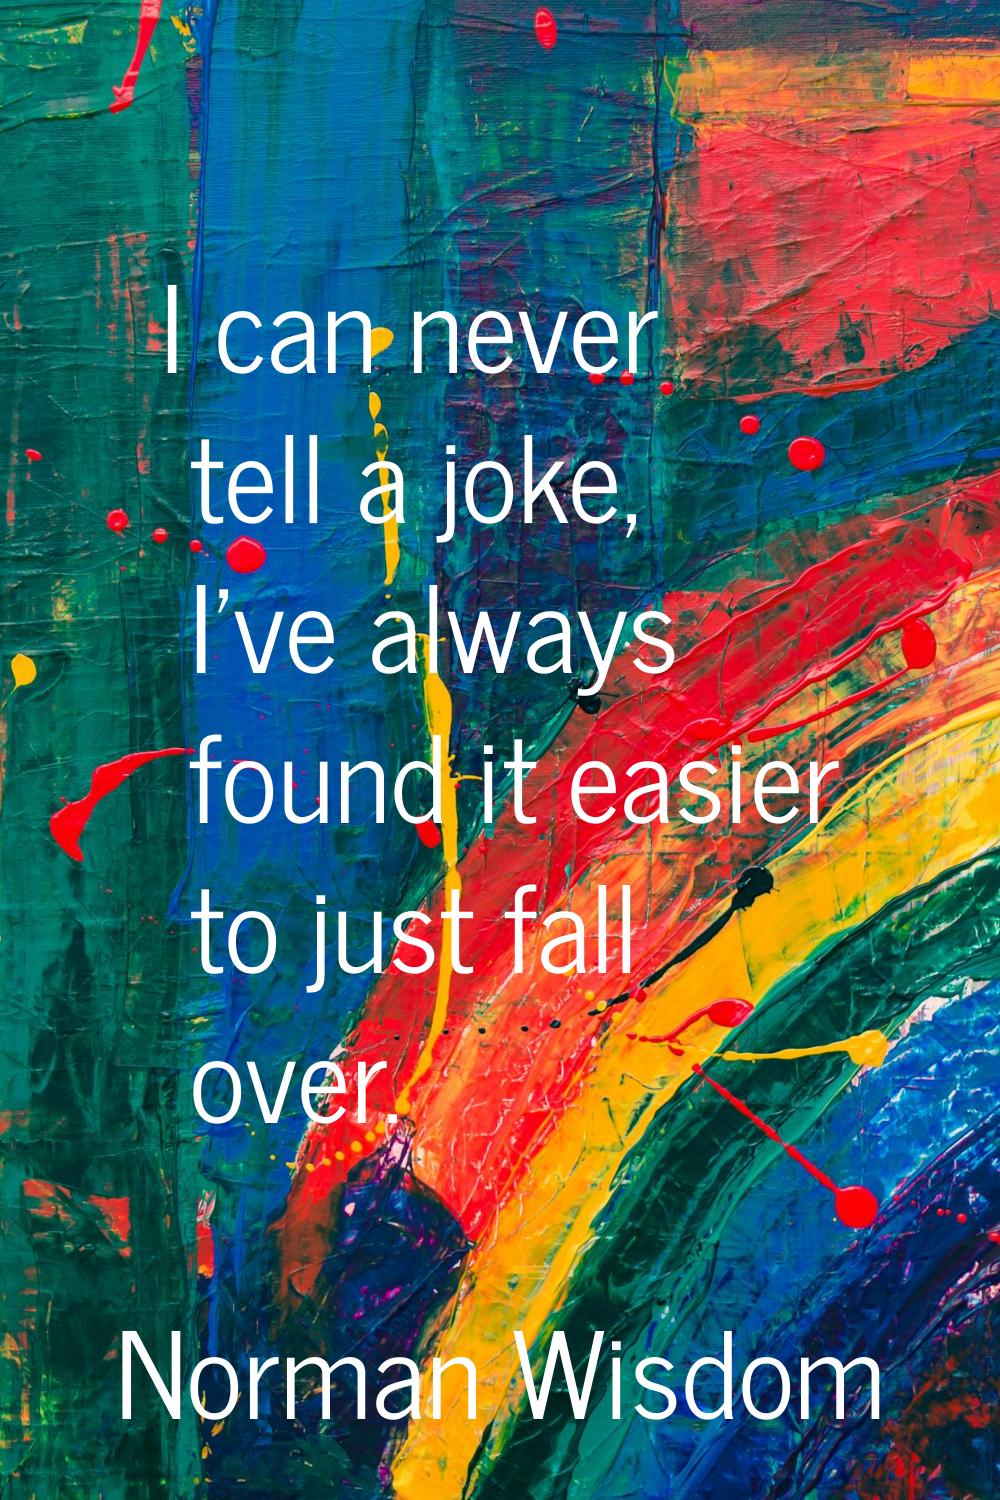 I can never tell a joke, I've always found it easier to just fall over.